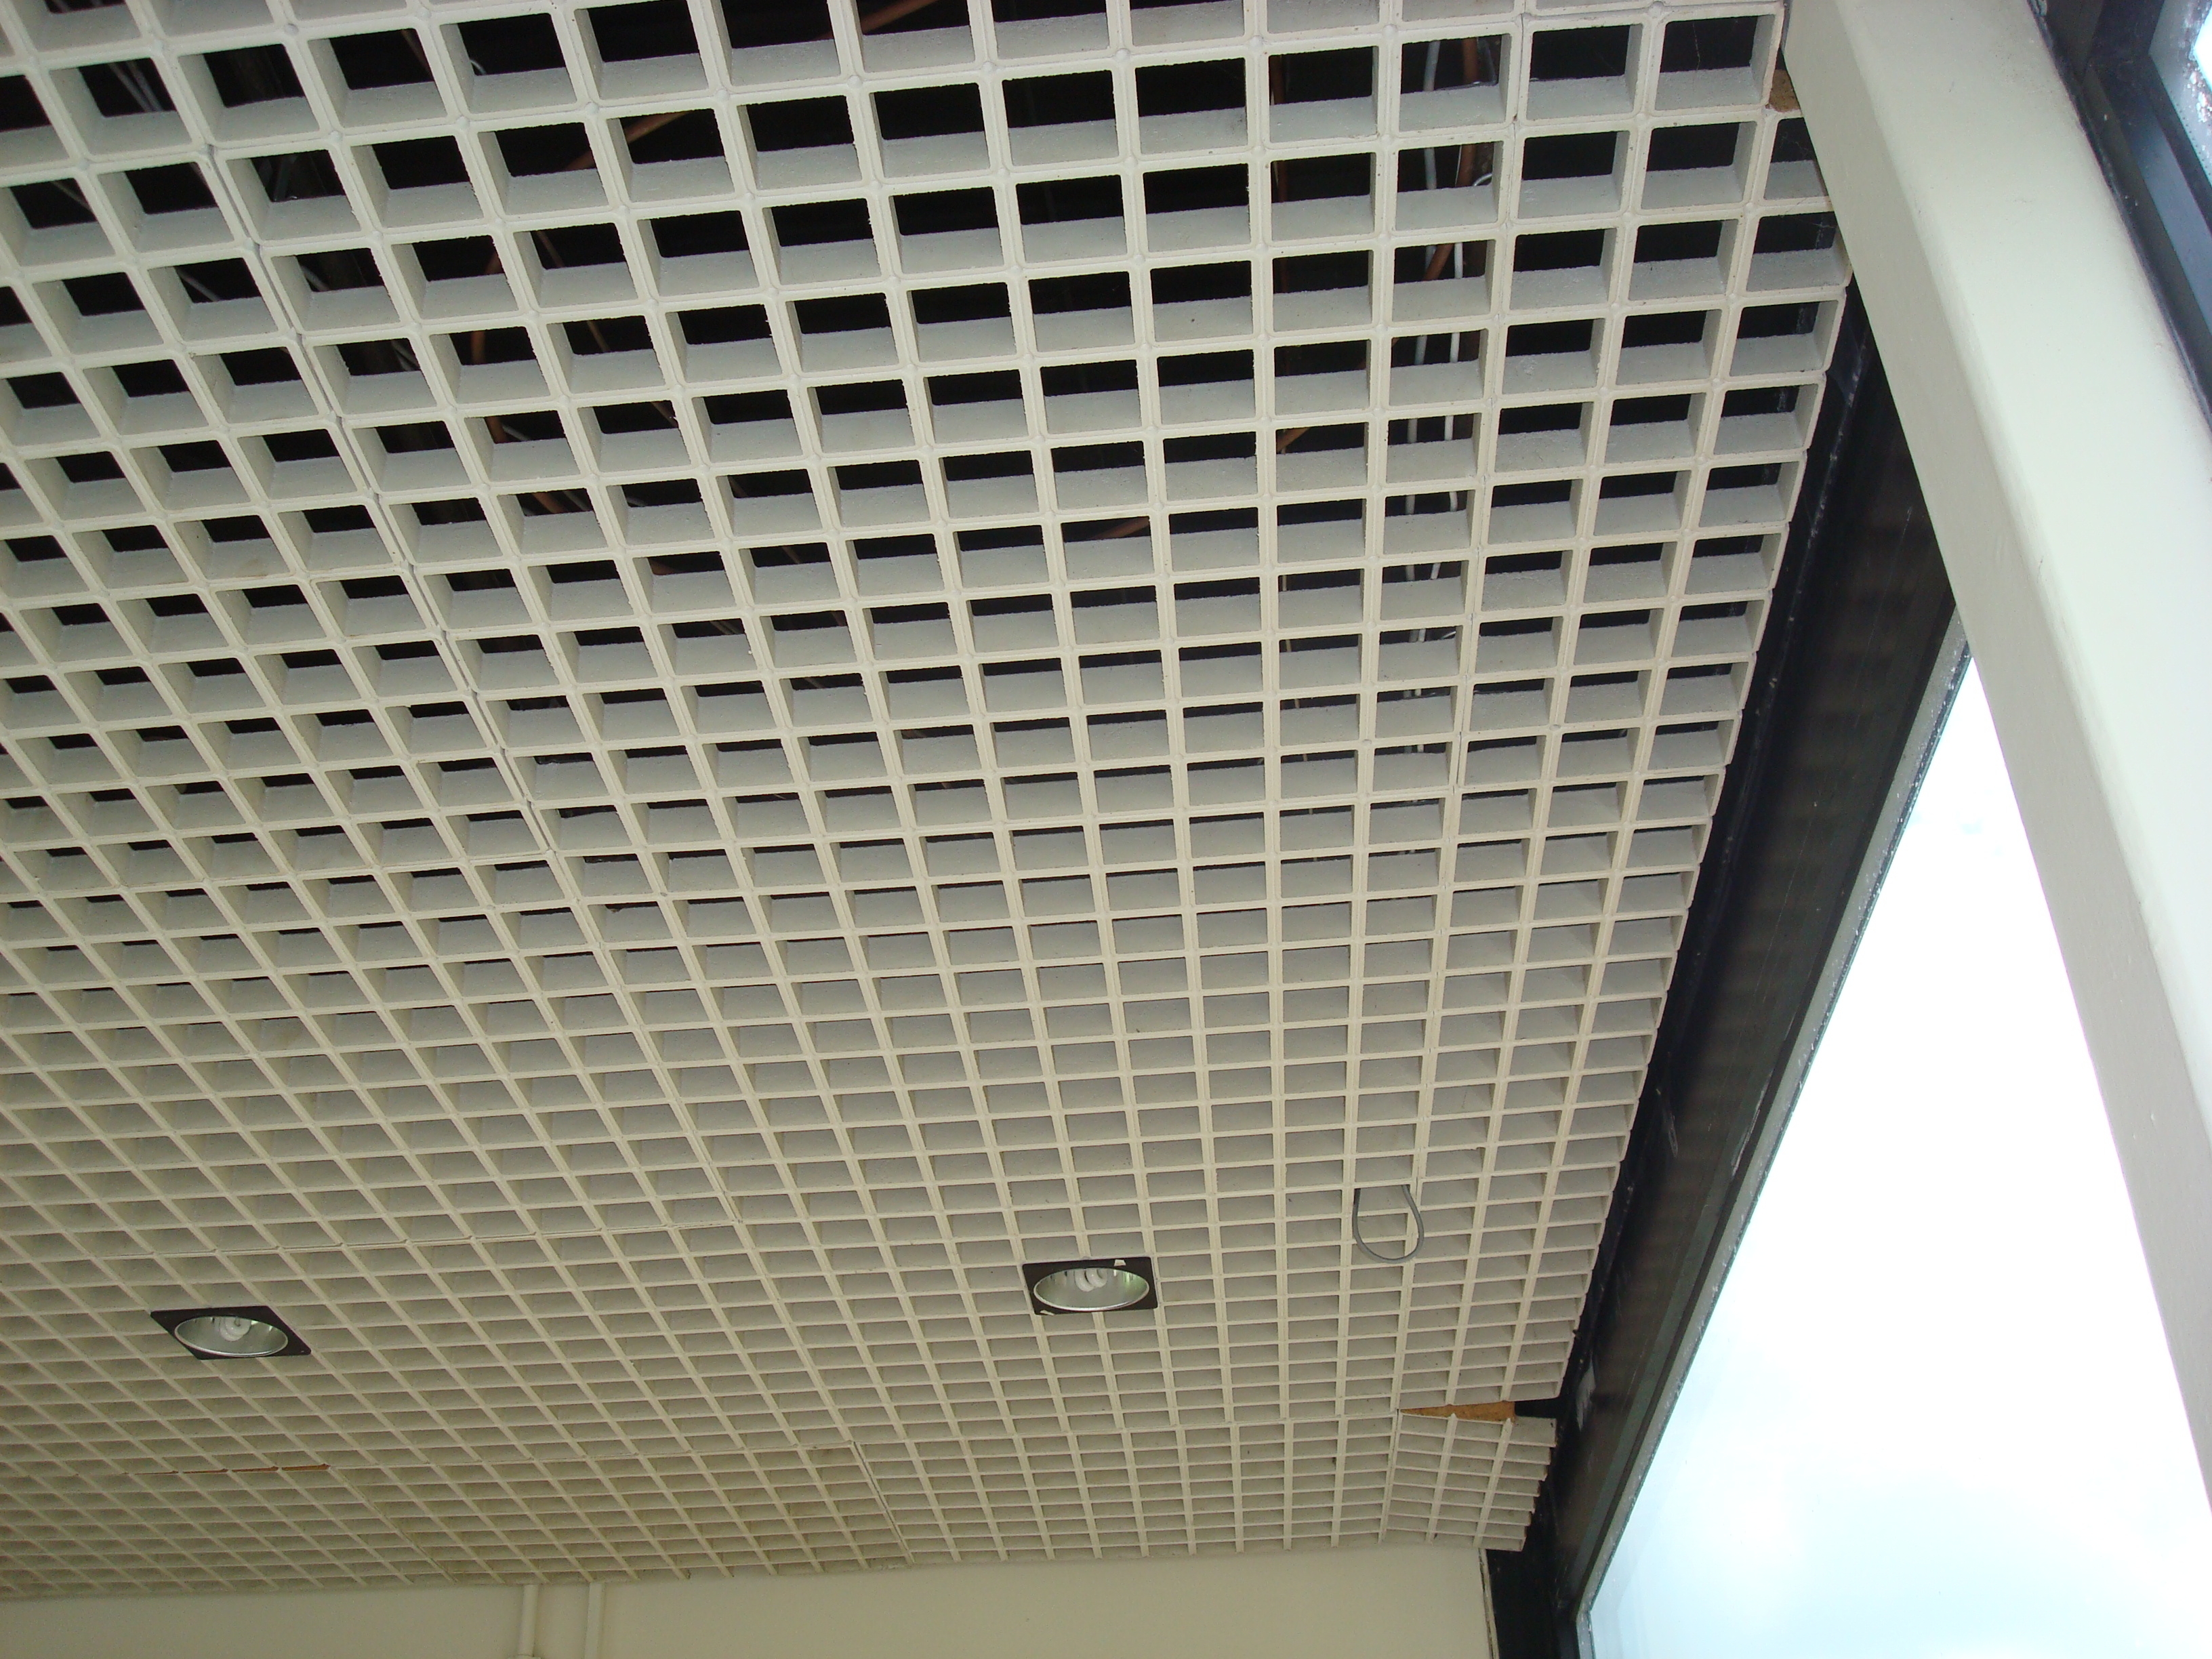 Metal Egg Crate Ceiling Tilessuspended ceiling in chippenham cre8tive interiors uk